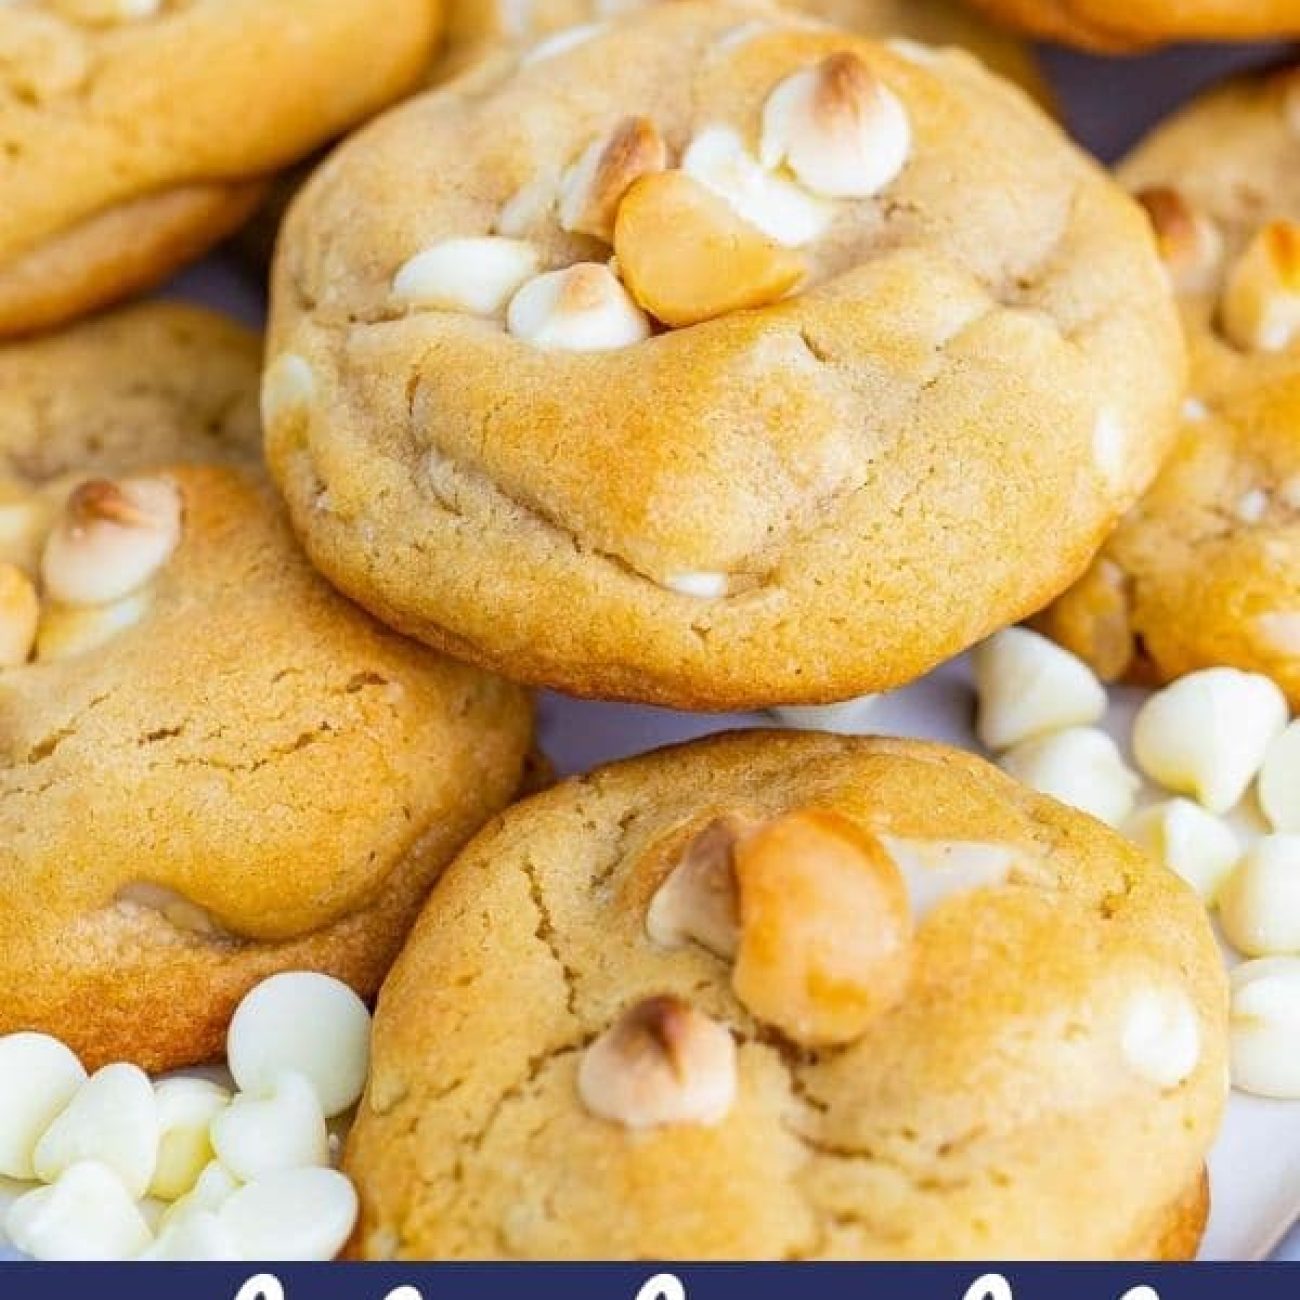 White Chocolate Macadamia Nut Cookies by Terry